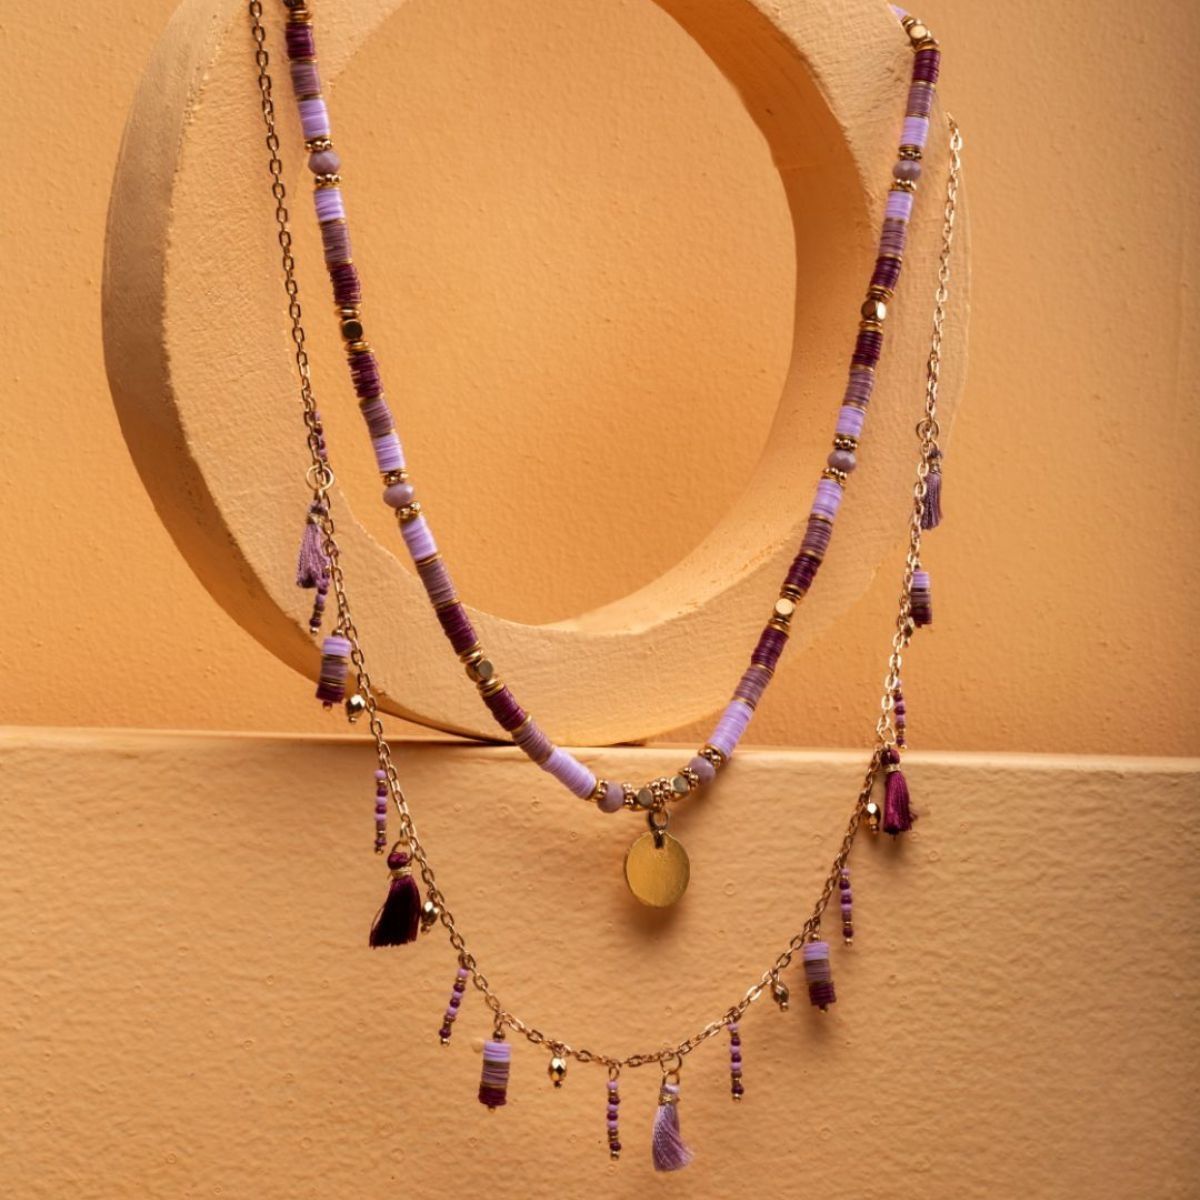 Necklaces & Chains | Pink Beaded Charm Necklace | Freeup